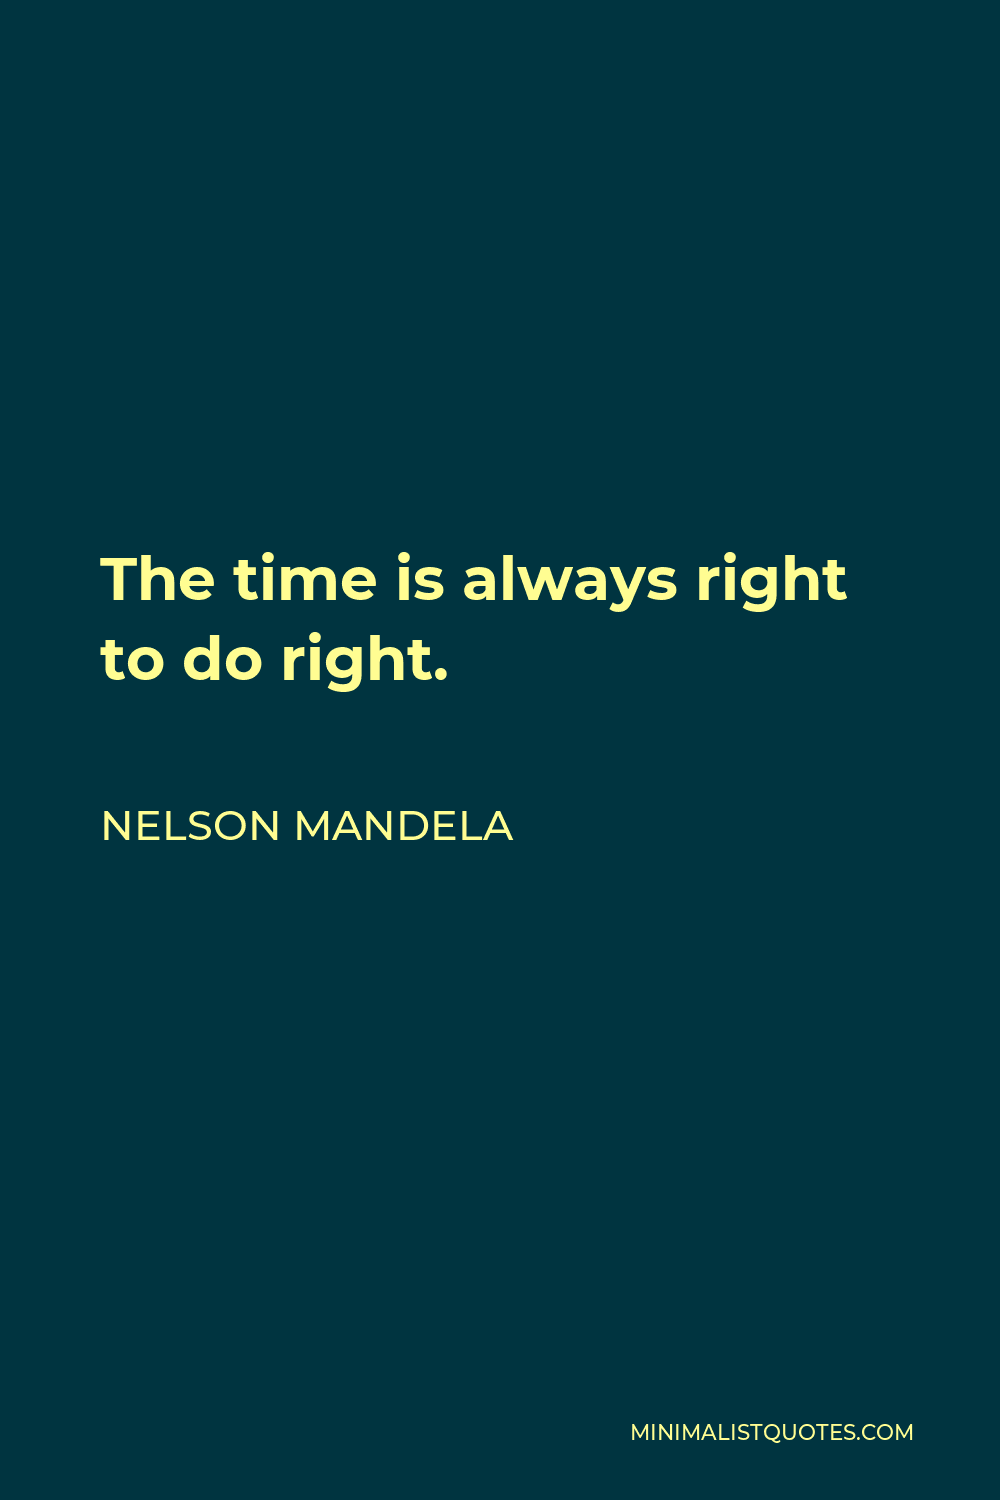 Nelson Mandela Quote - The time is always right to do right.